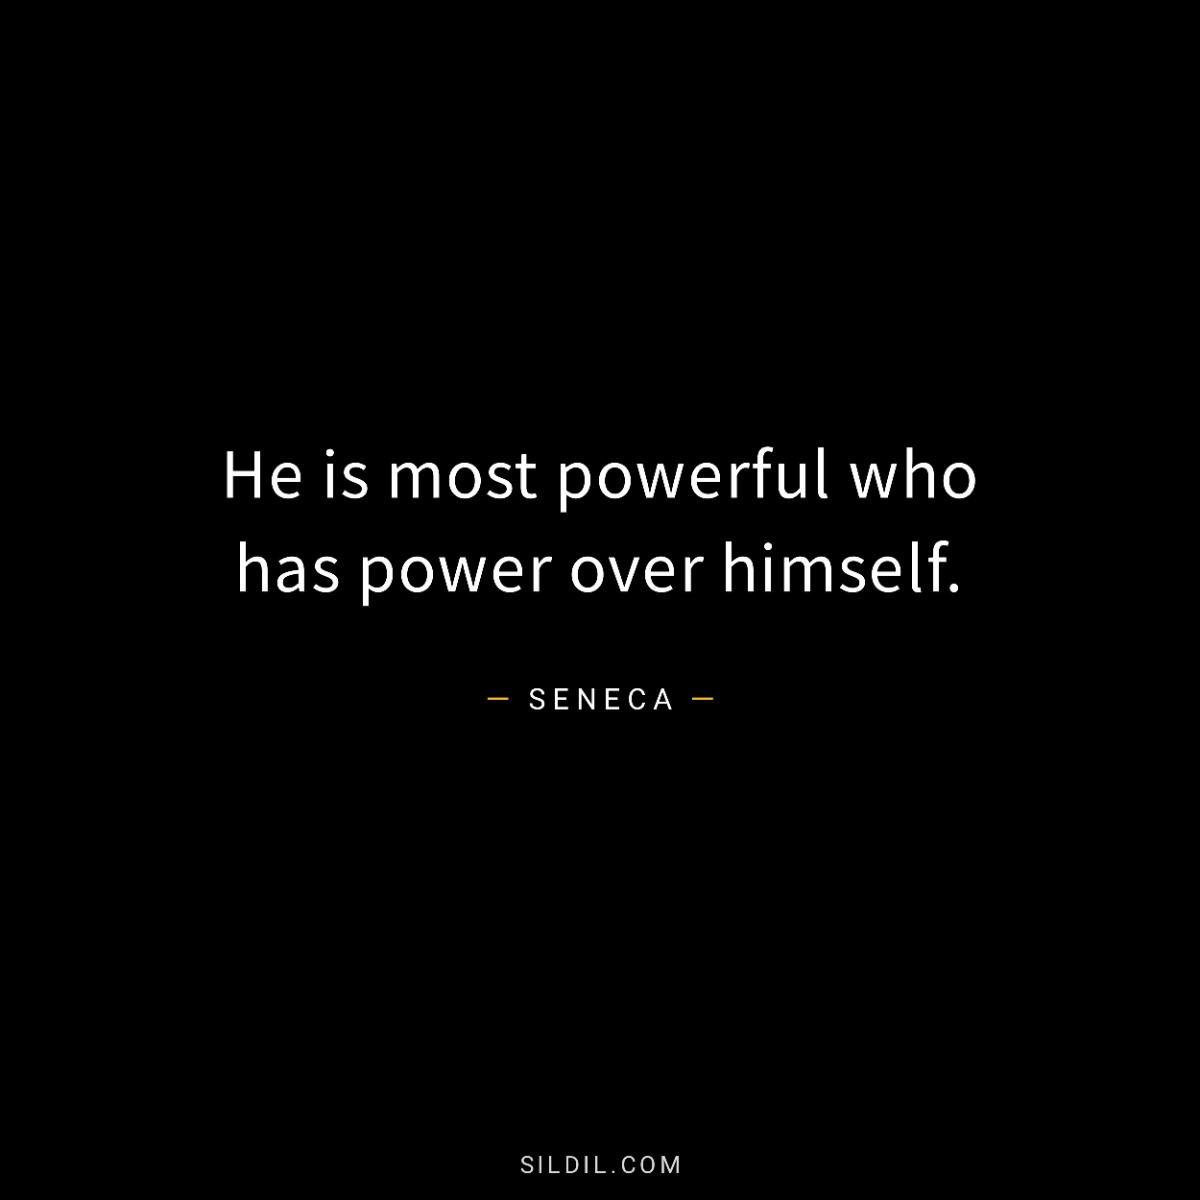 He is most powerful who has power over himself.